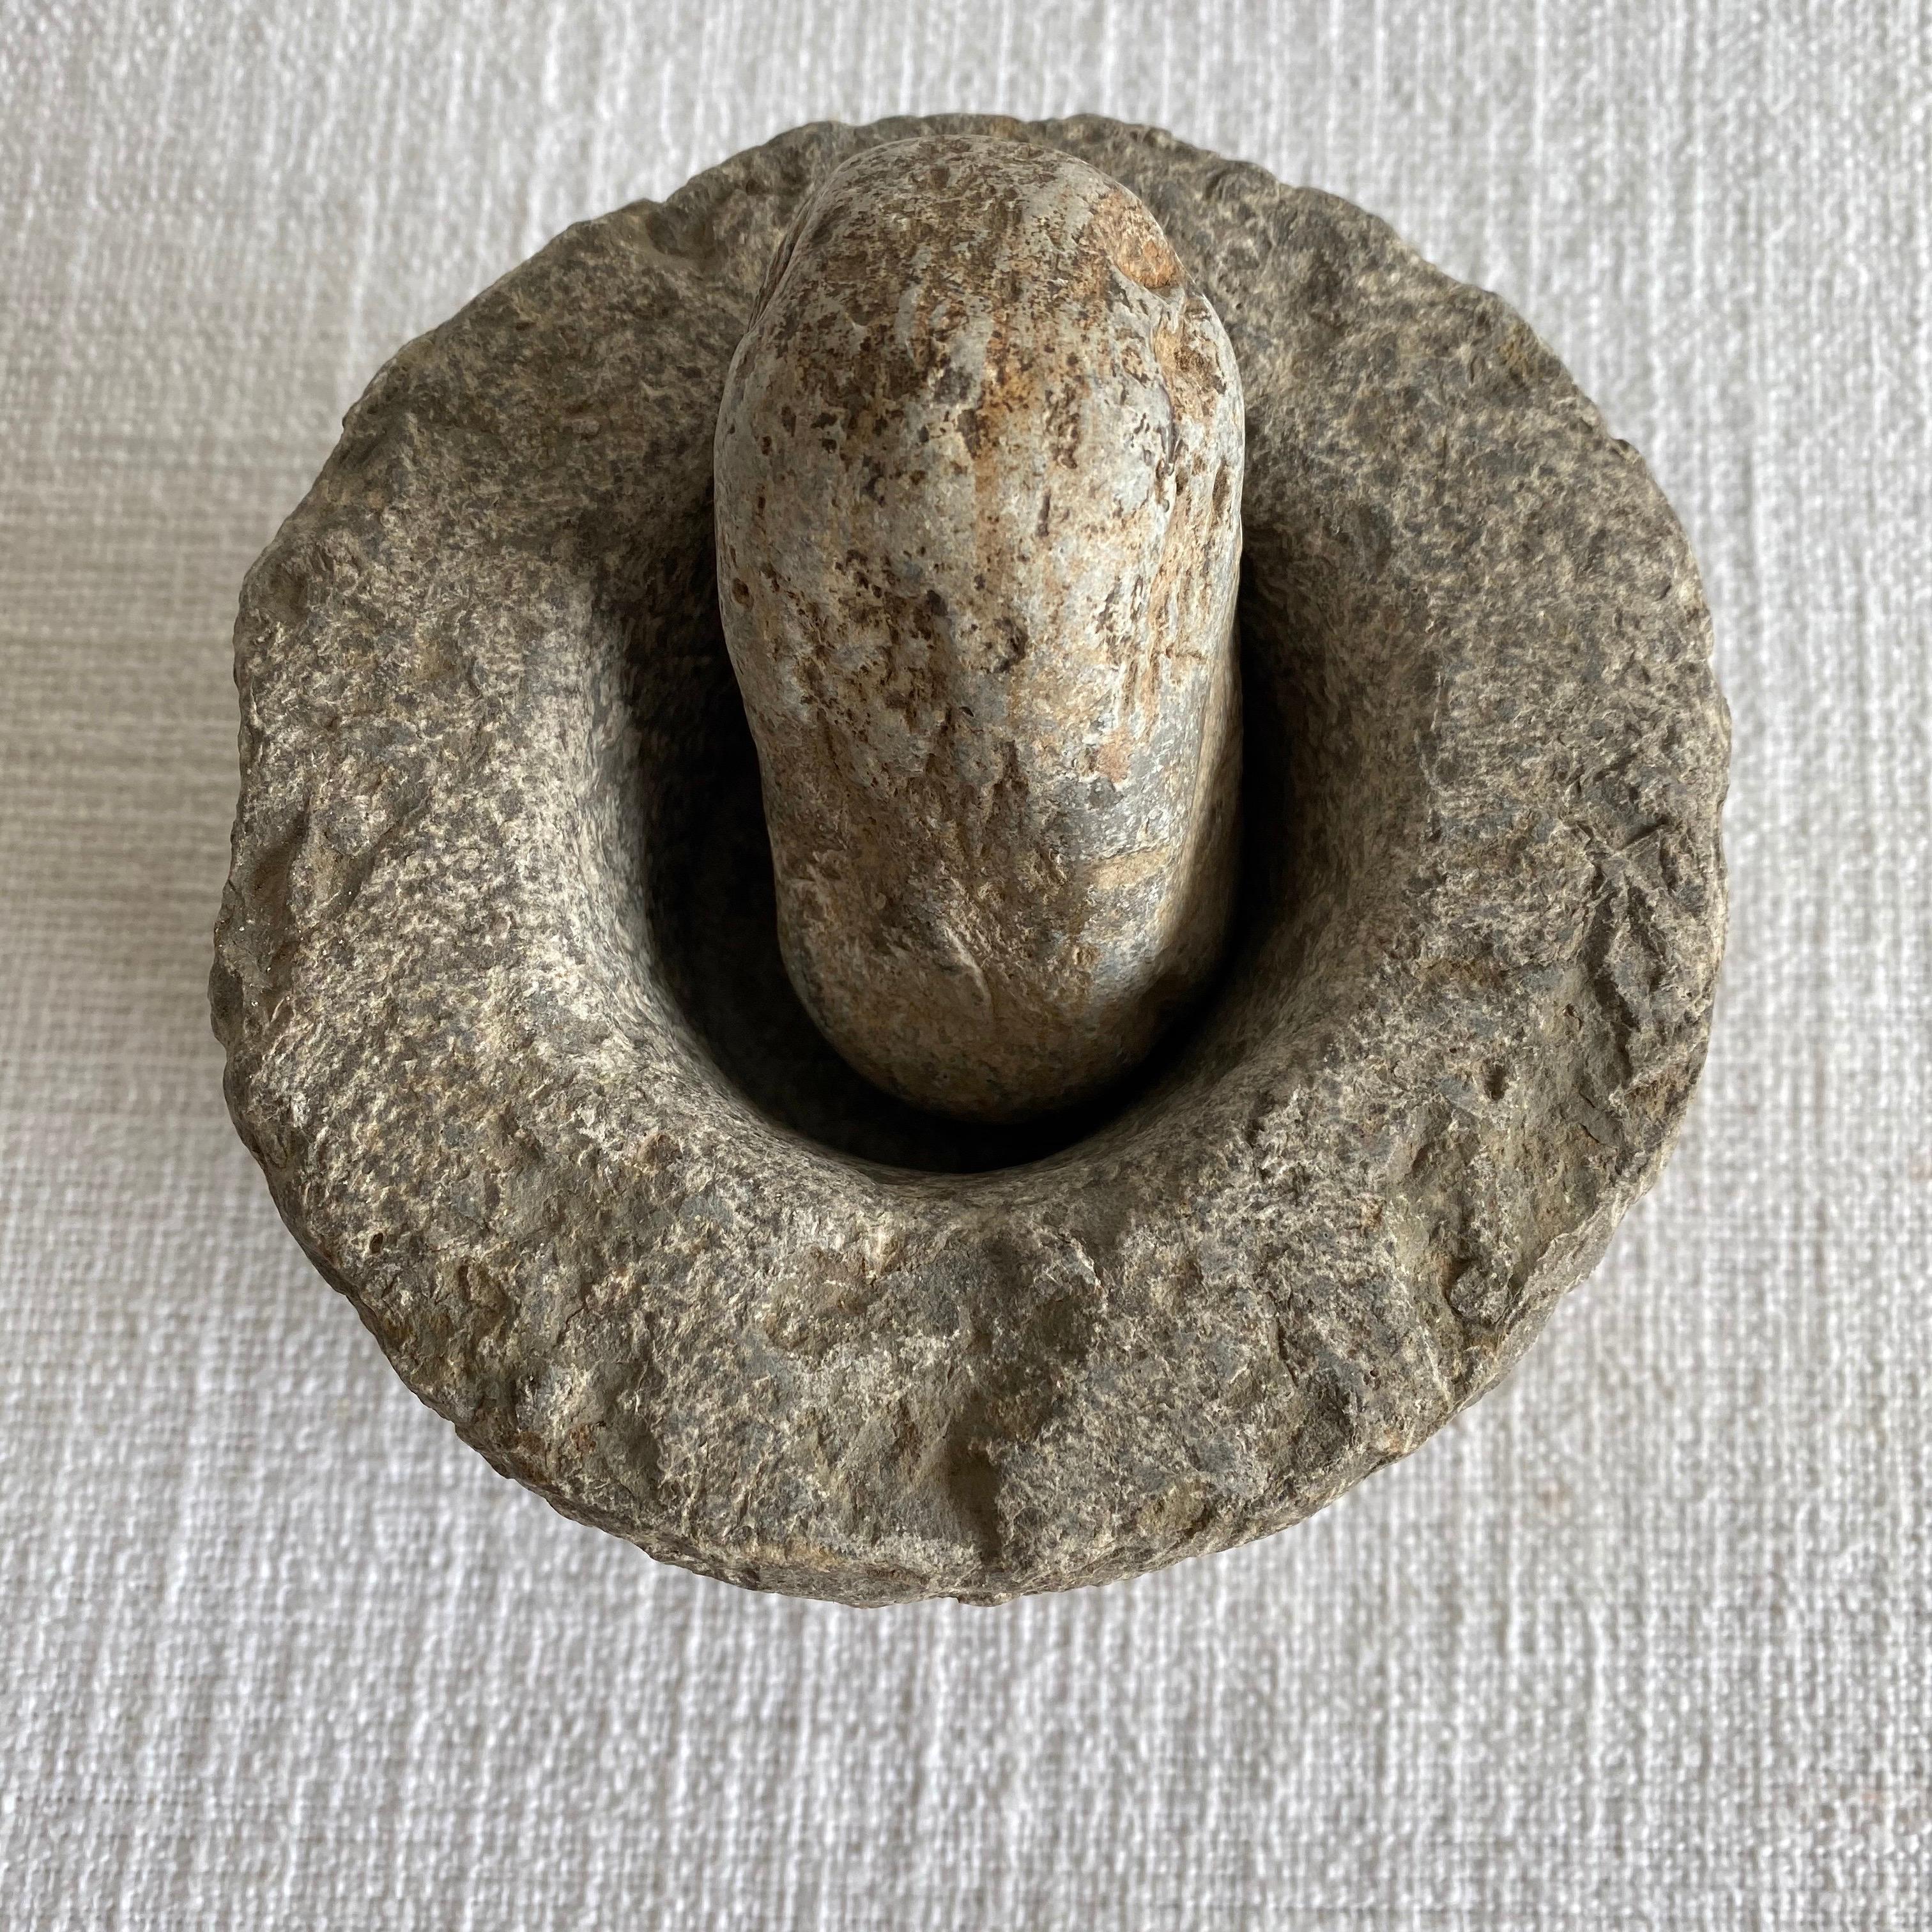 Antique stone mortar and pestle set, solid heavy stone, use as decoration, or for everyday use.
Size: 6” D x 5.5”
Weight: 10lbs.